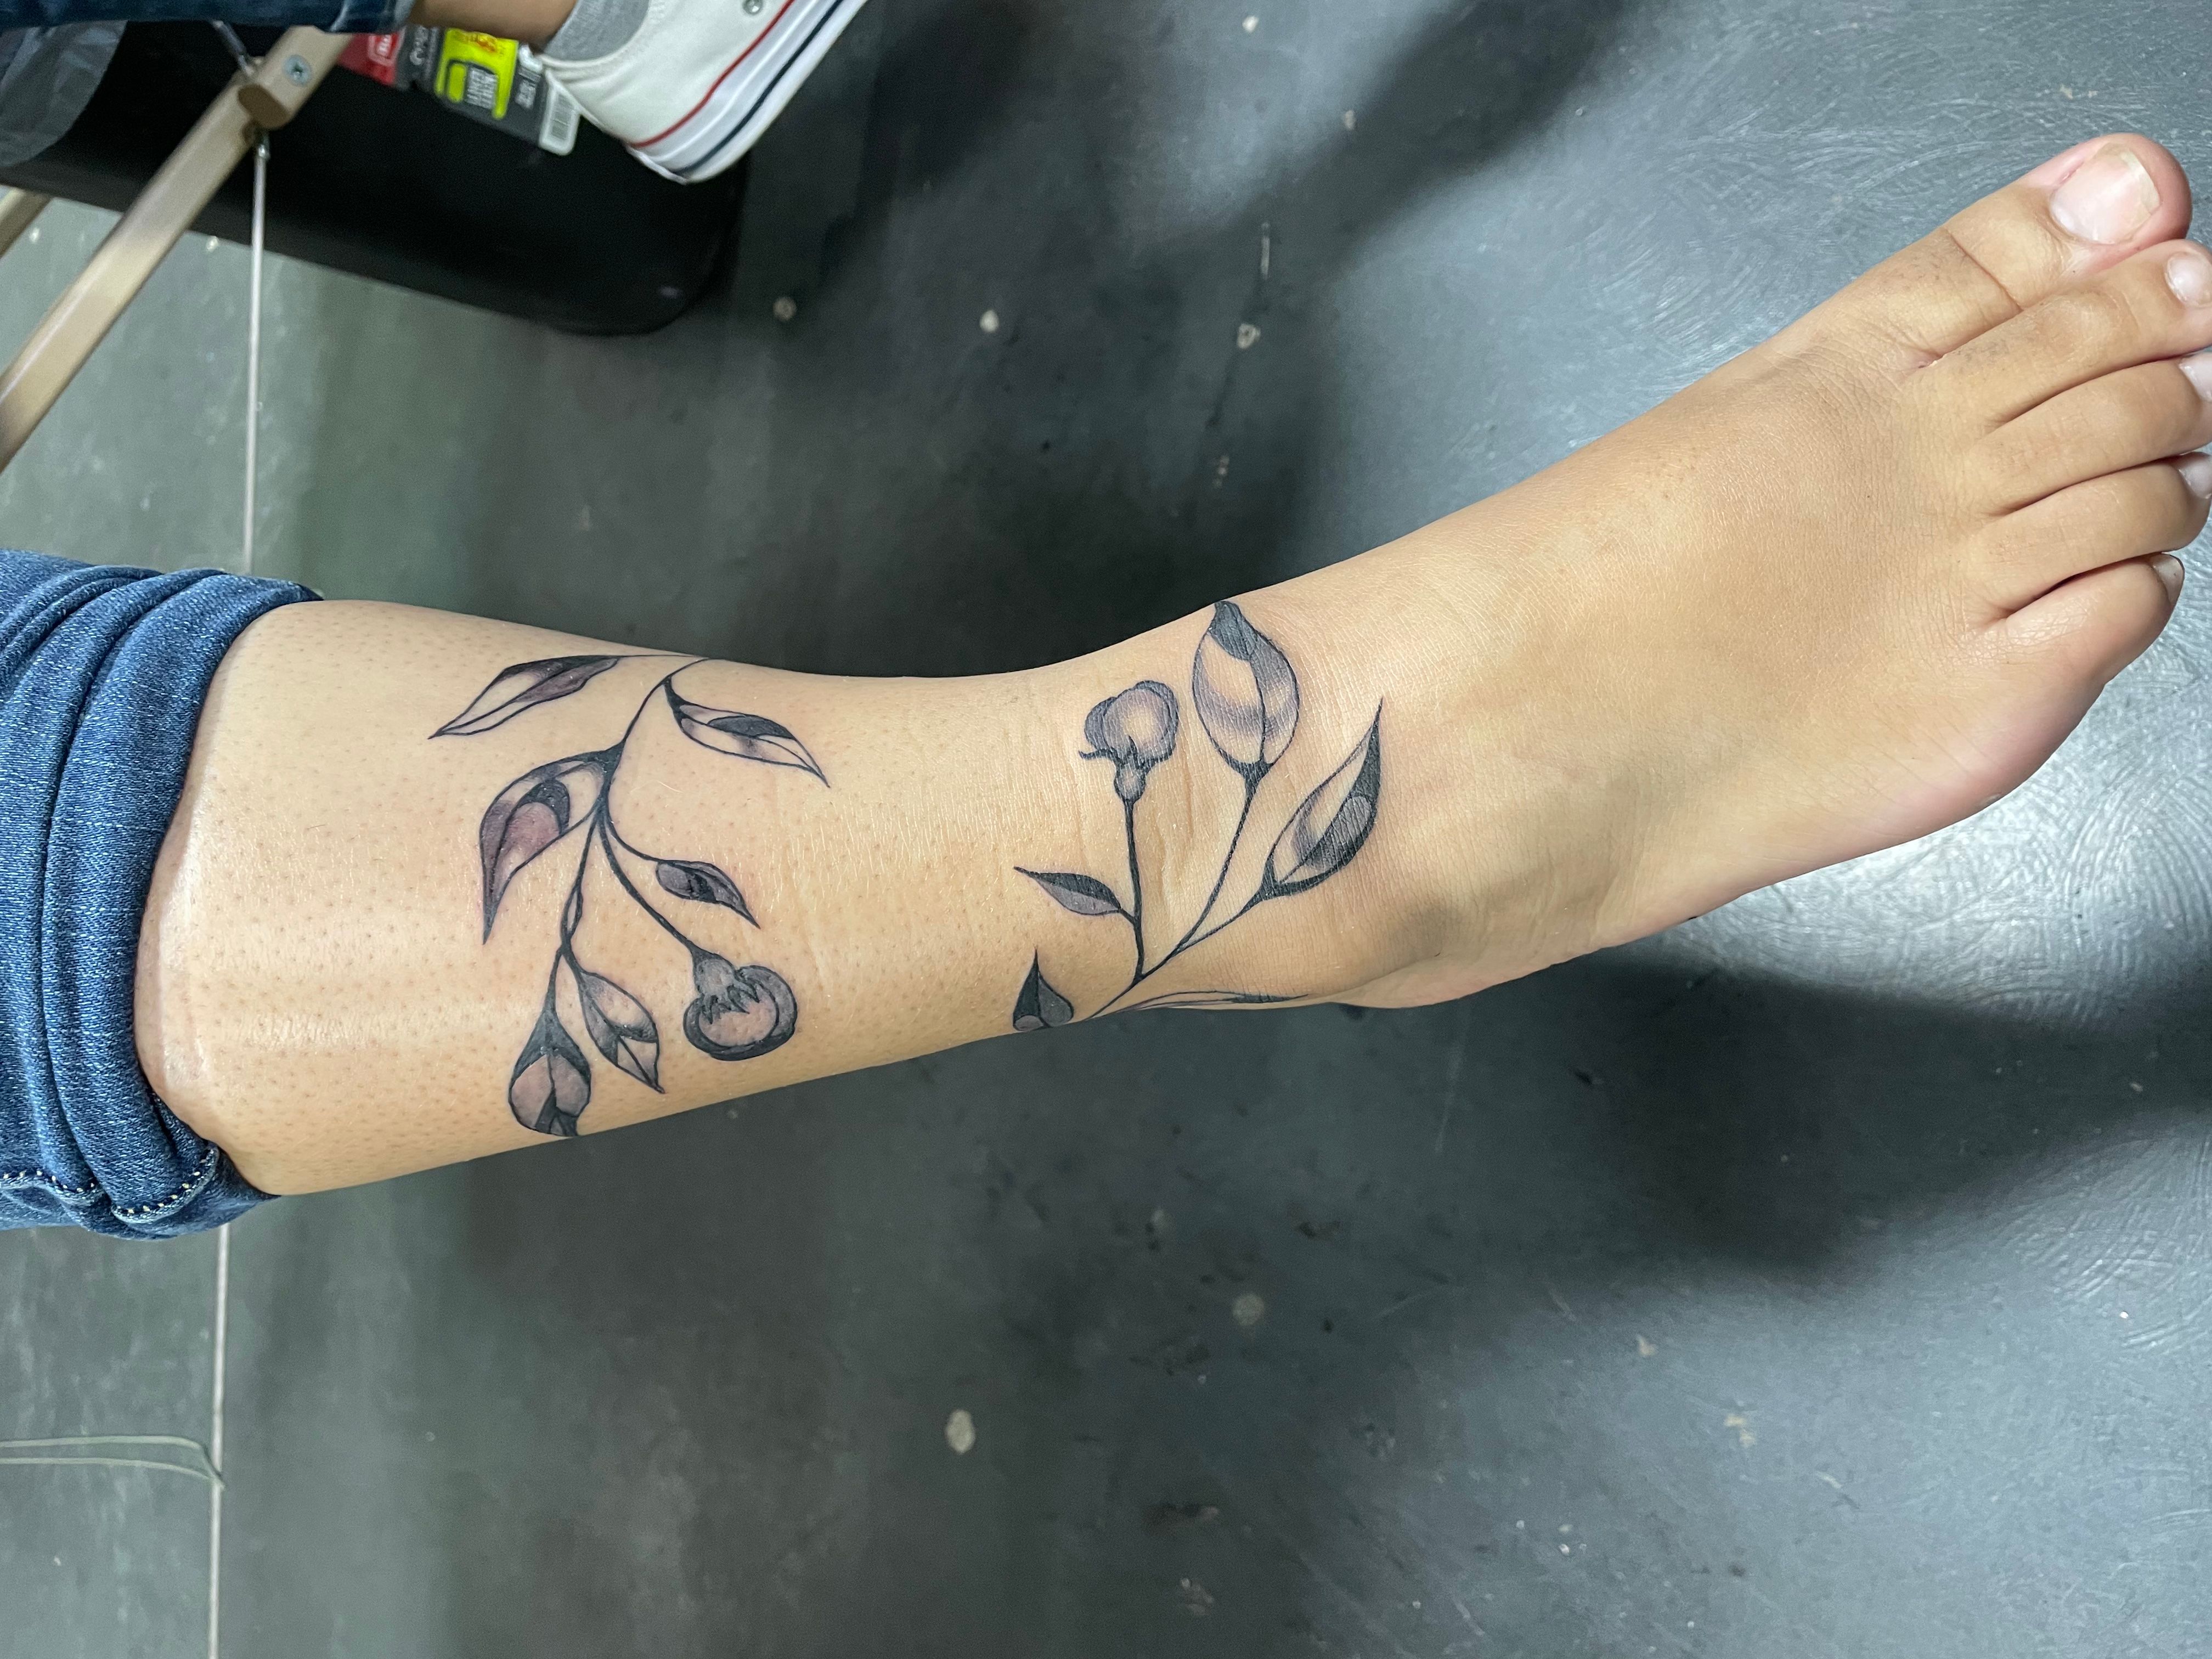 10 Ankle Band Tattoo Ideas And Meanings Youll Fall In Love With